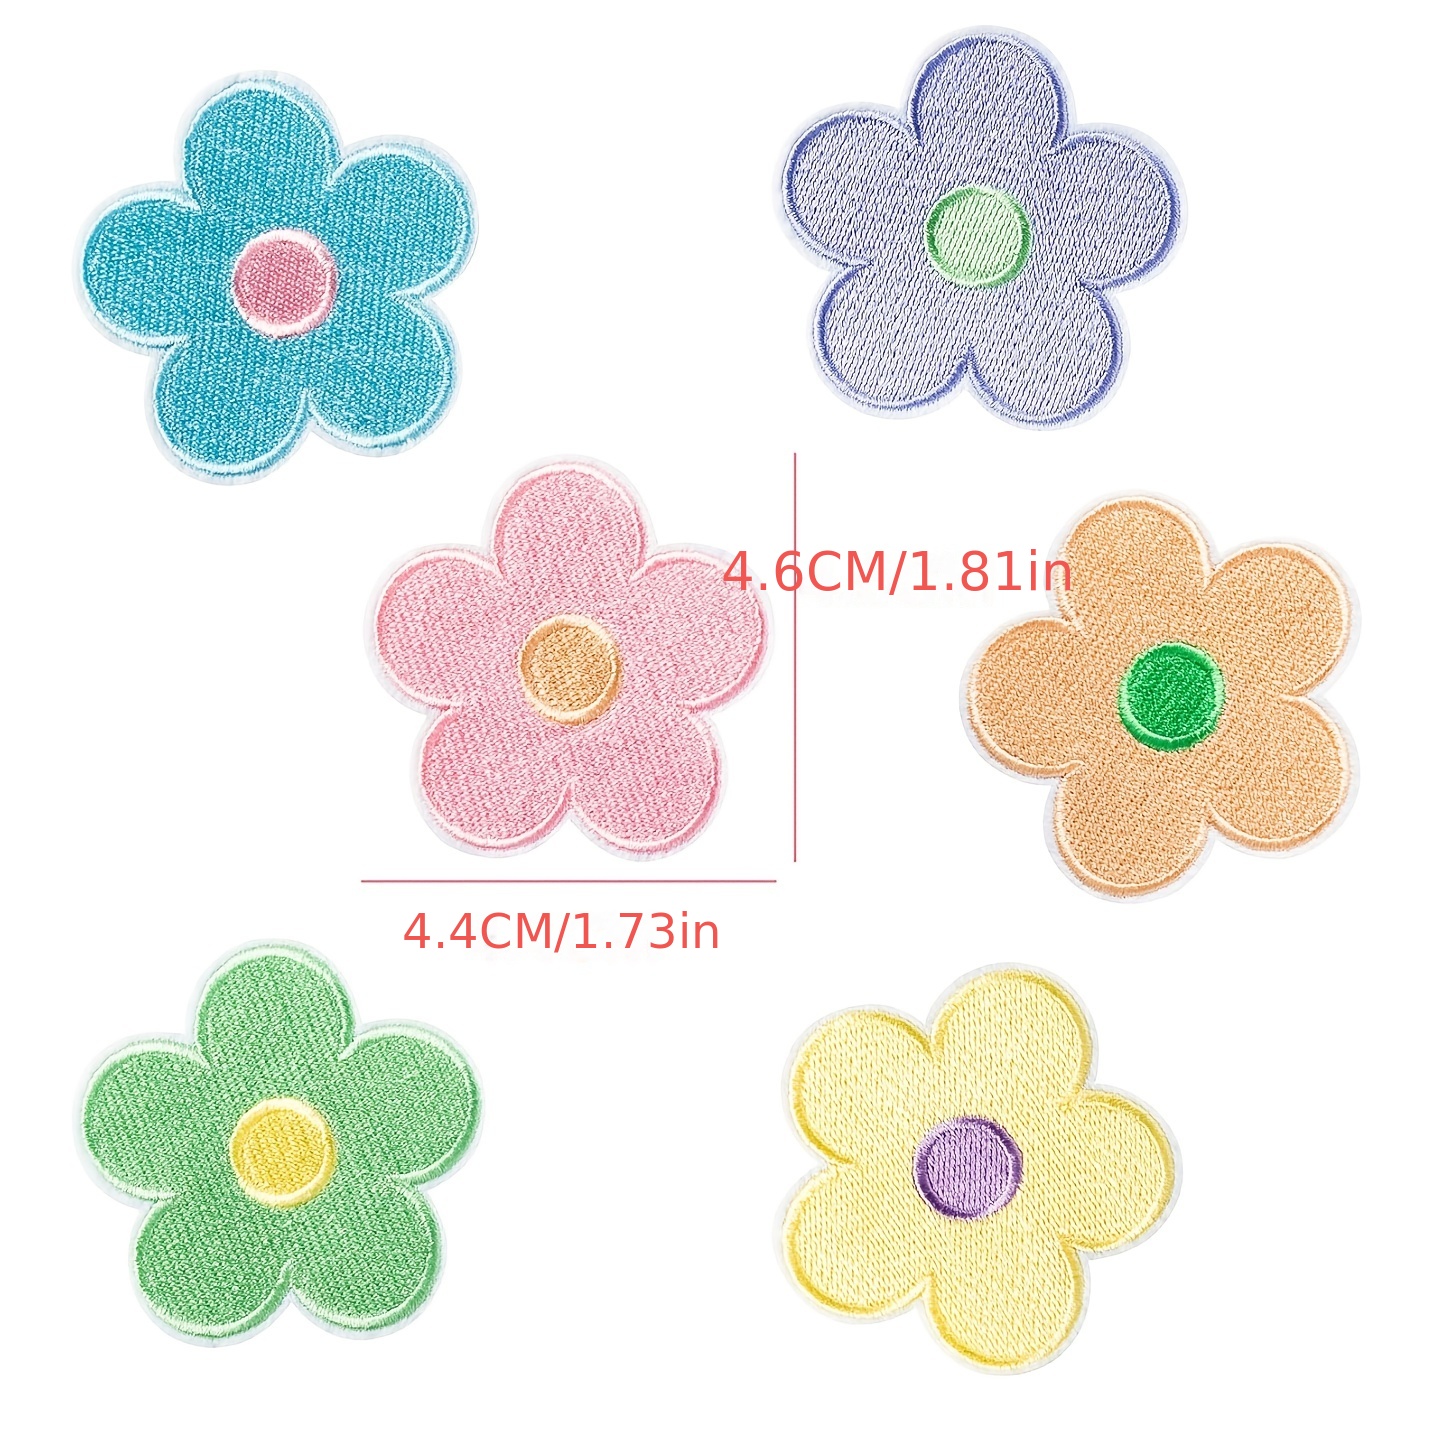 5pcs Small Floral Decorative Sewing Patches Suitable For Daily